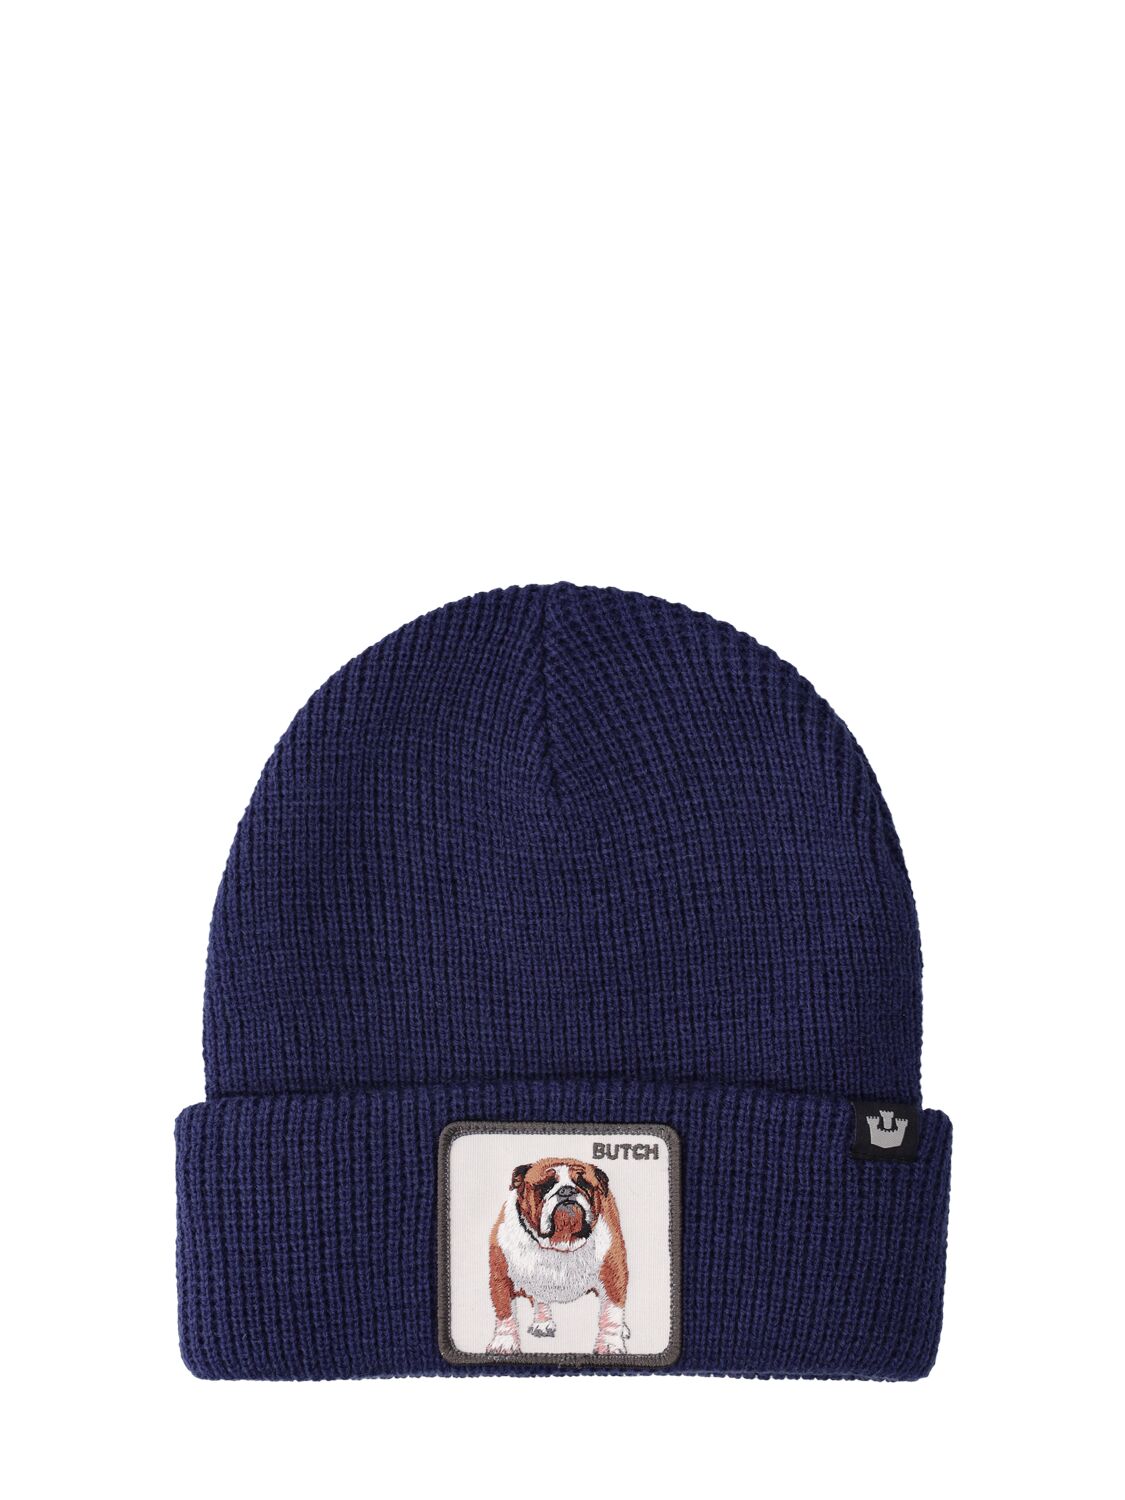 Image of Hot Diggity Dog Knit Beanie